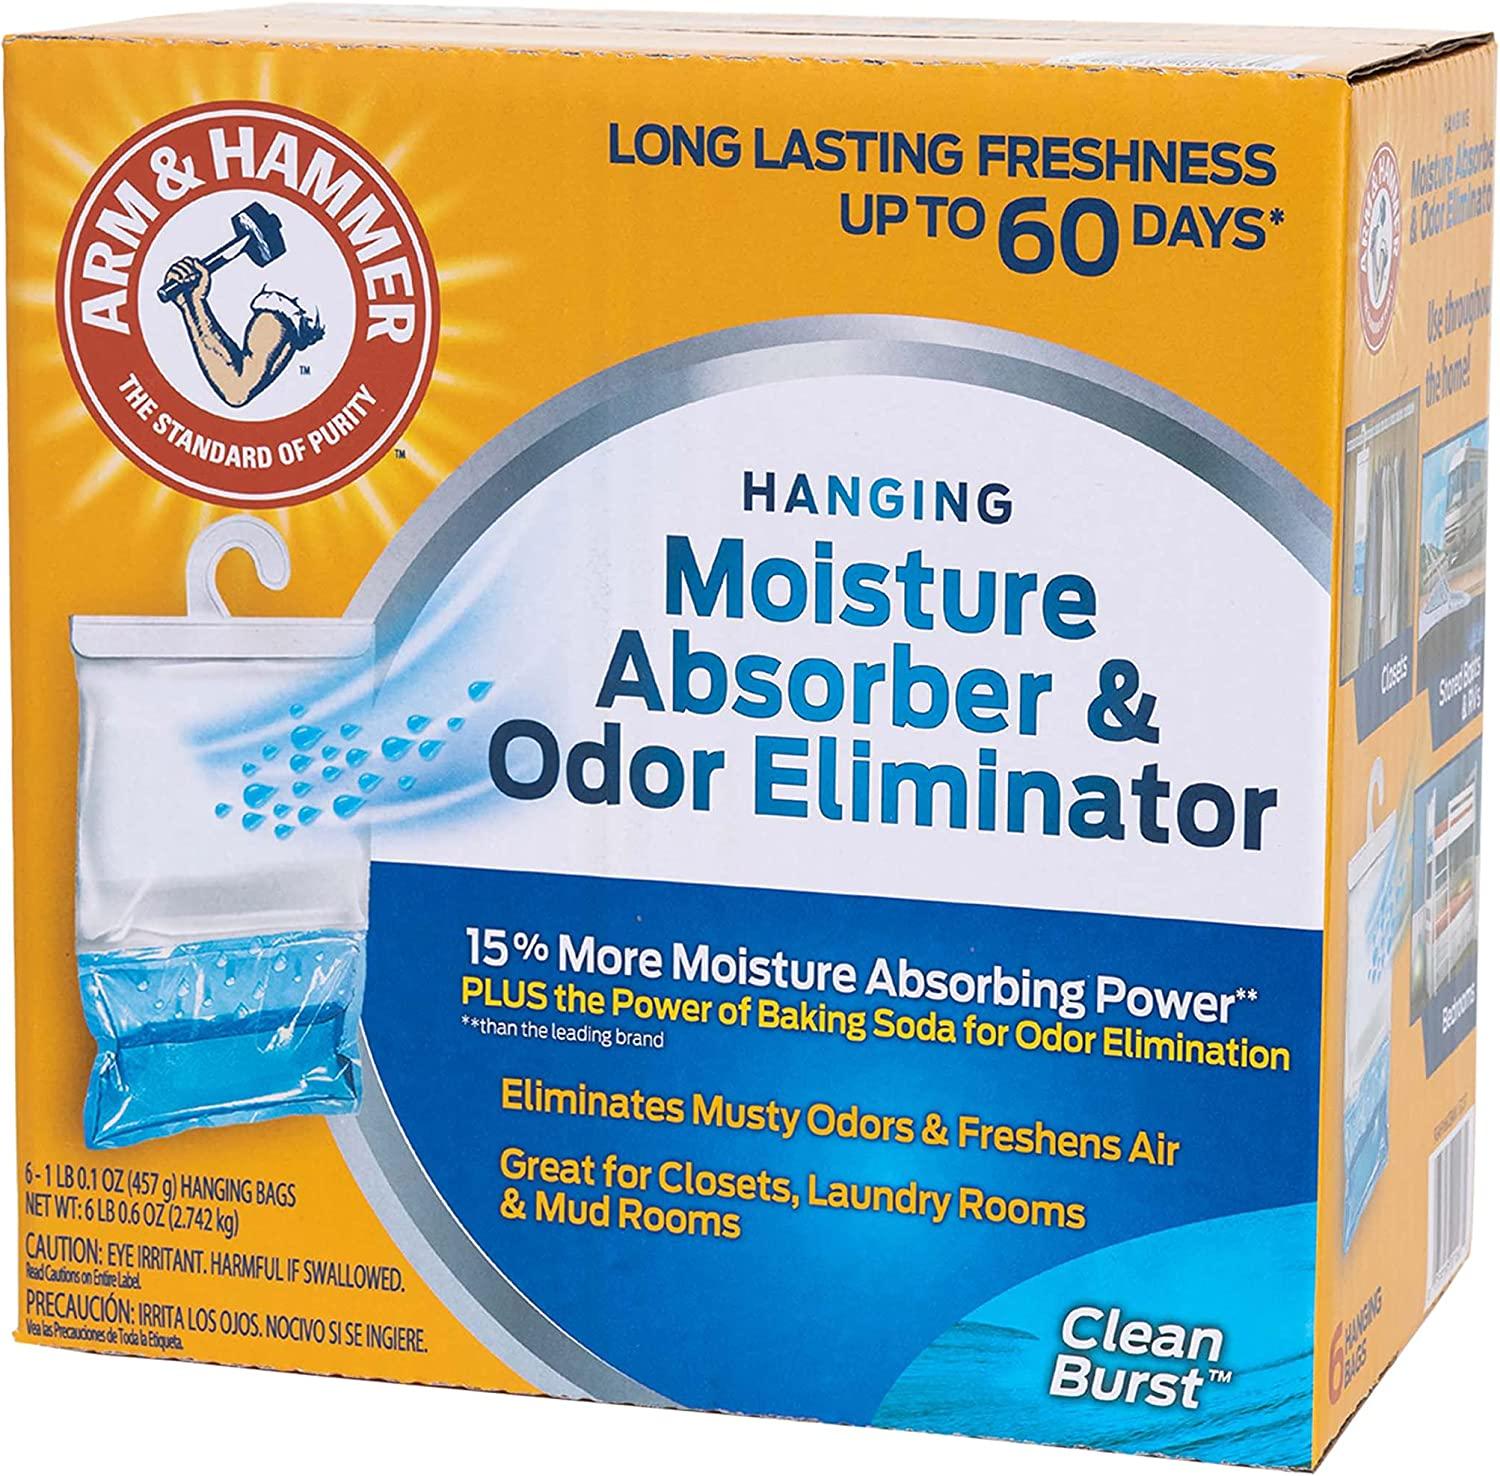 Arm & Hammer Hanging Moisture Absorber and Odor Eliminator, 16.1 oz., 6  Pack - Clean Burst, Moisture Absorbers for Closet and Small Rooms,  Long-Lasting Freshness